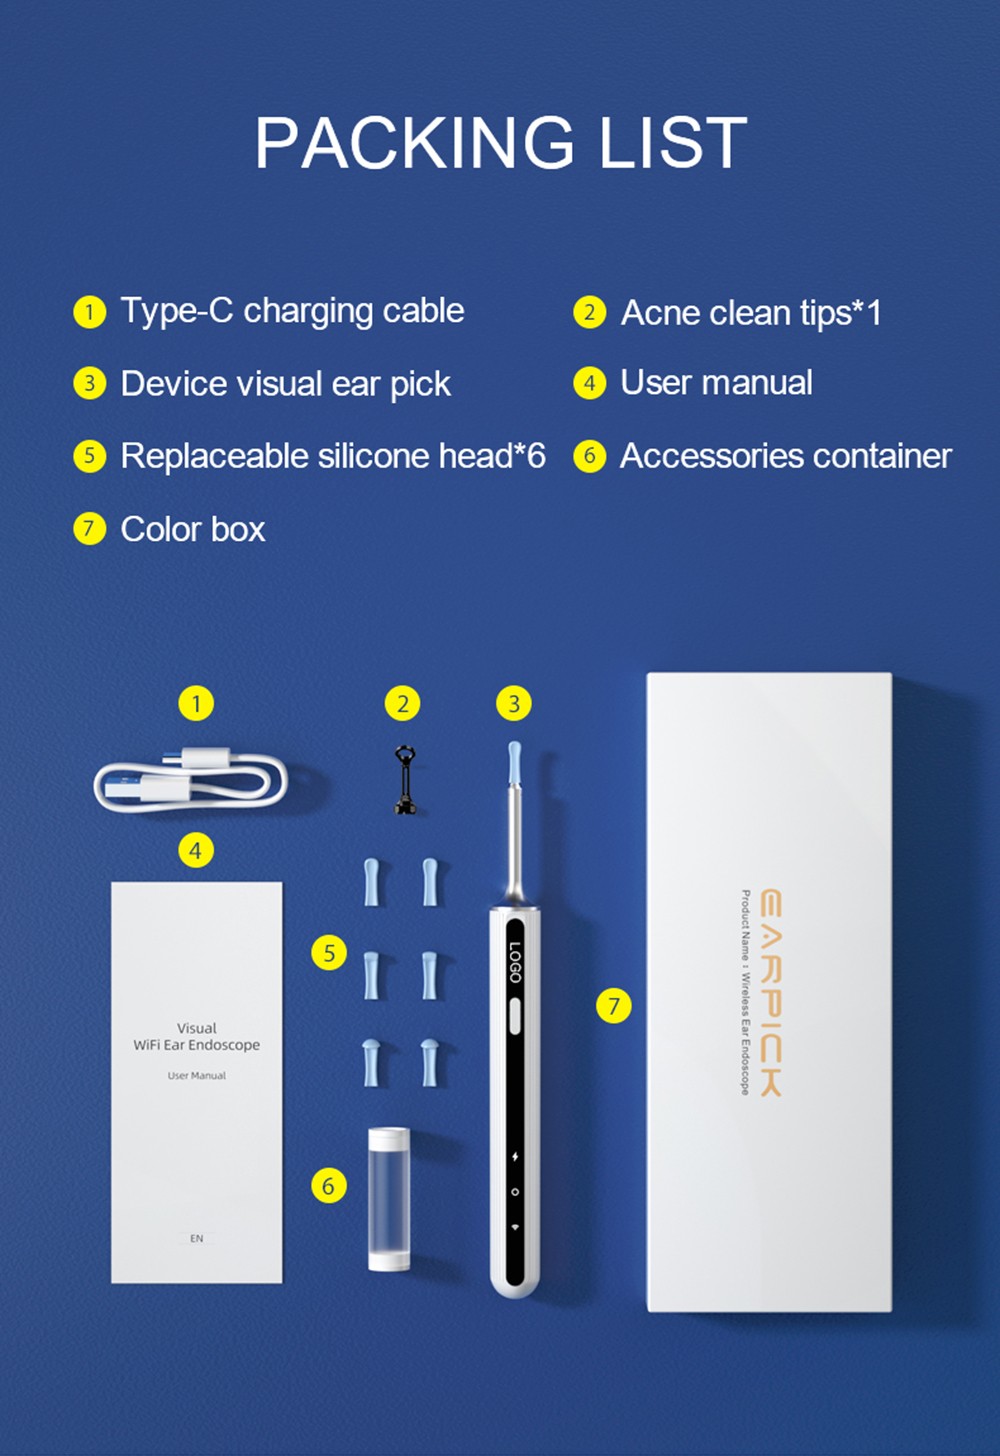 SUNUO X8 Smart Visual Ear Cleaner, Acne Squeezing, 5MP HD Camera, 6-Axis Gyroscope, Silicone Ear Tips, WiFi Connection